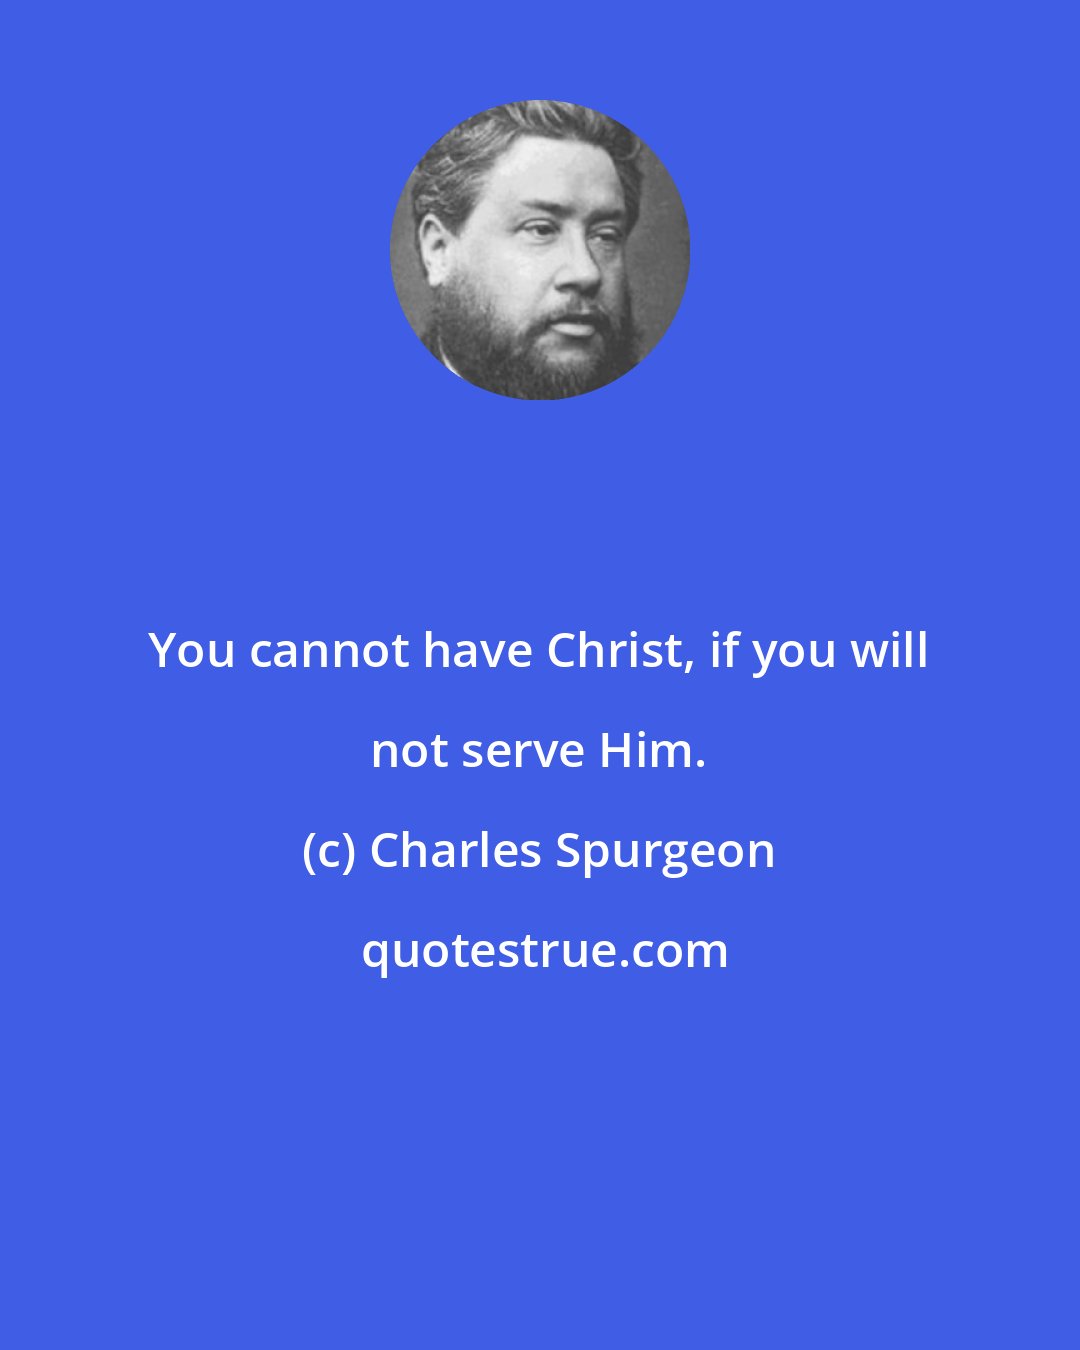 Charles Spurgeon: You cannot have Christ, if you will not serve Him.